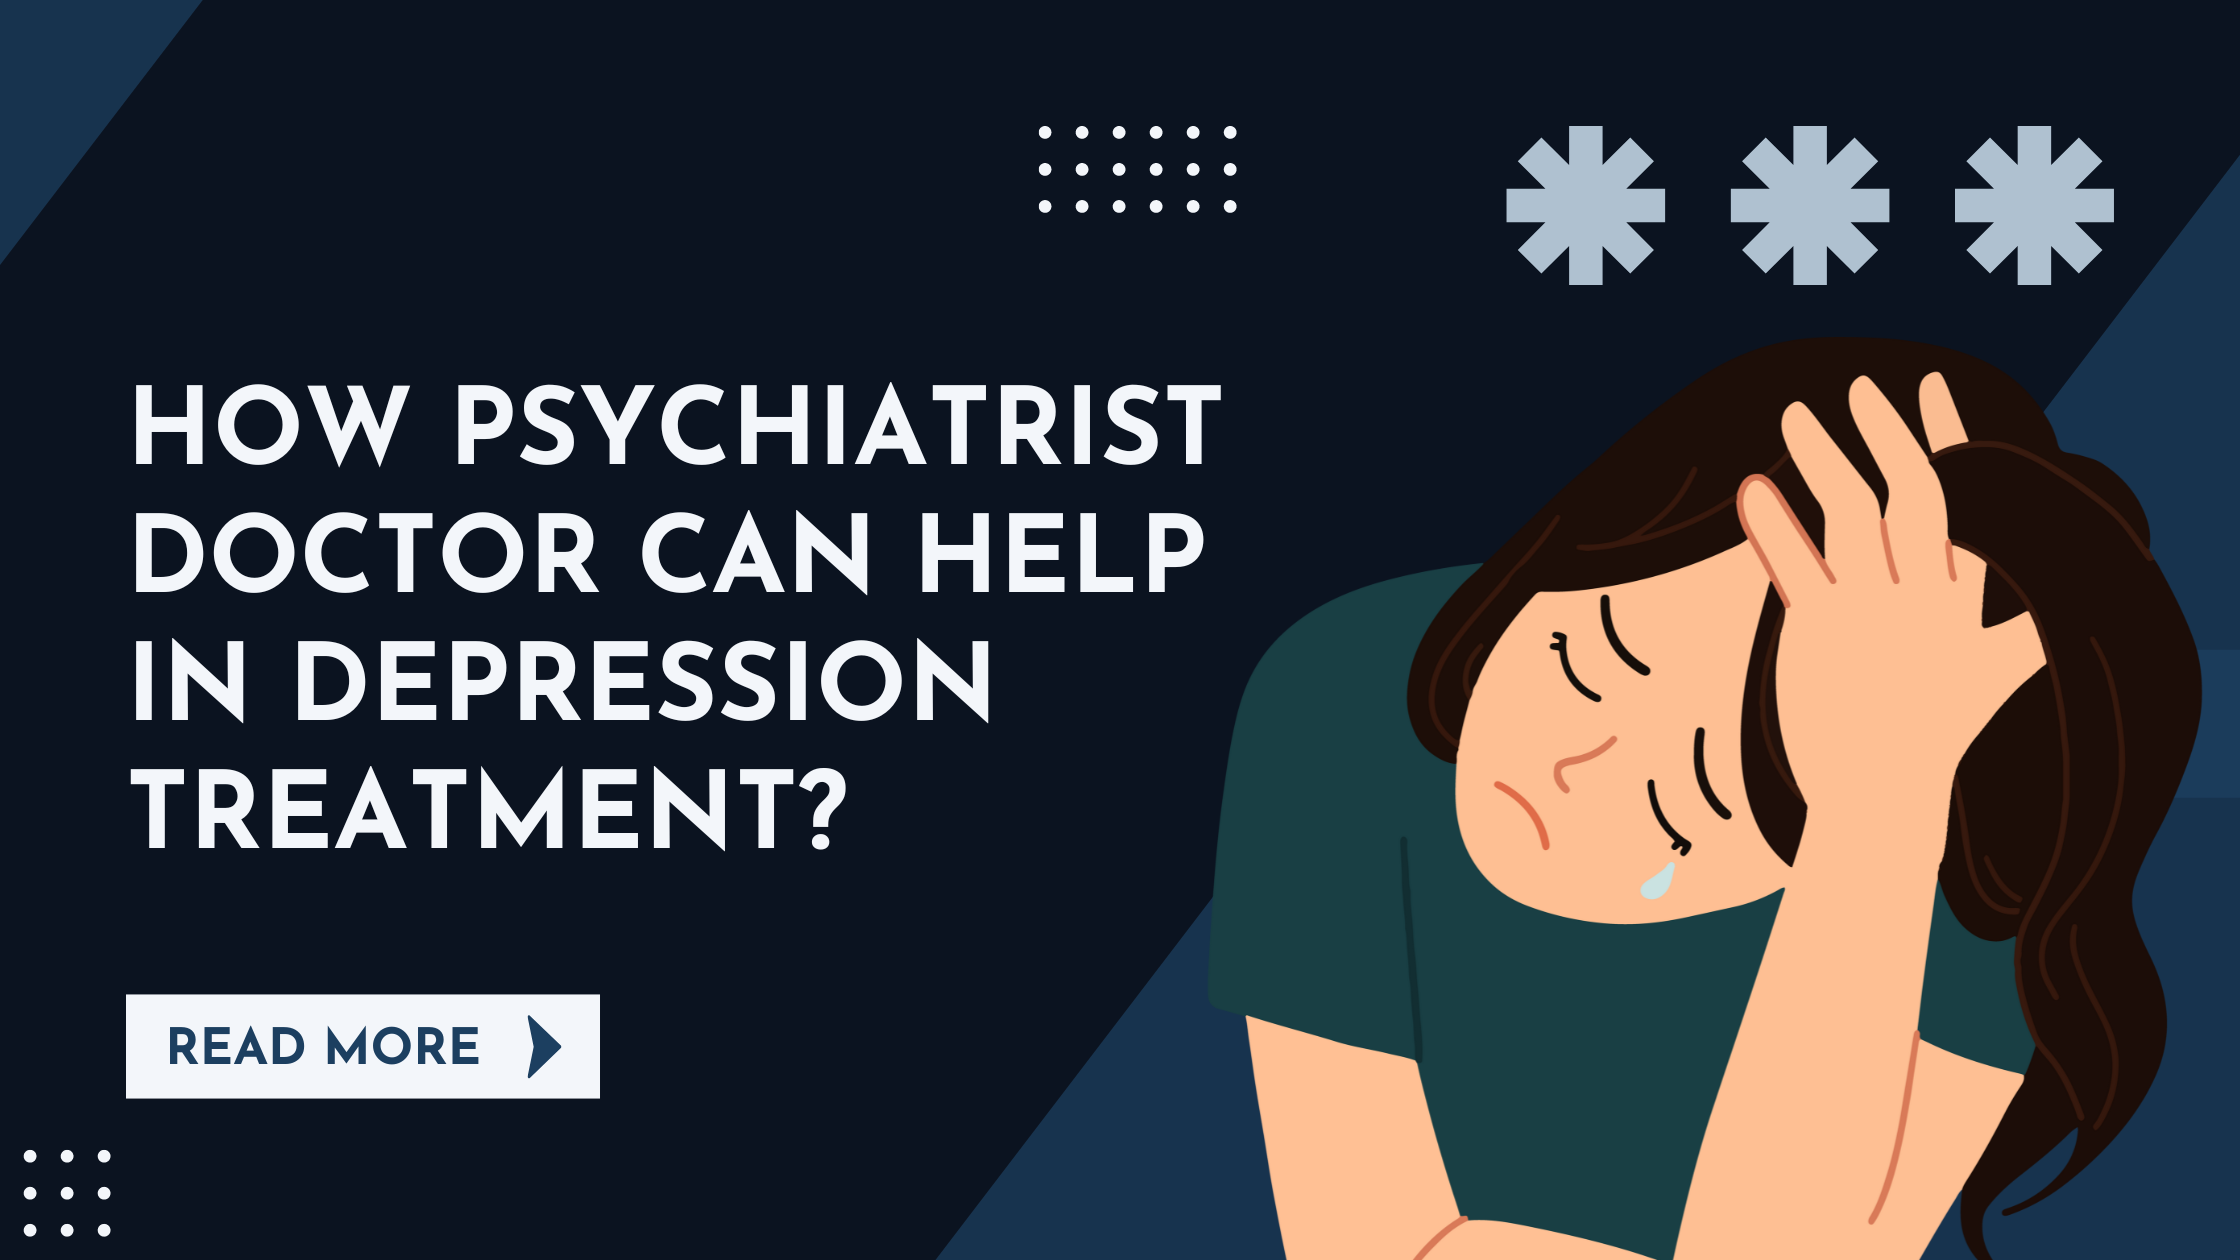 How Psychiatrist Doctor Can Help In Depression Treatment